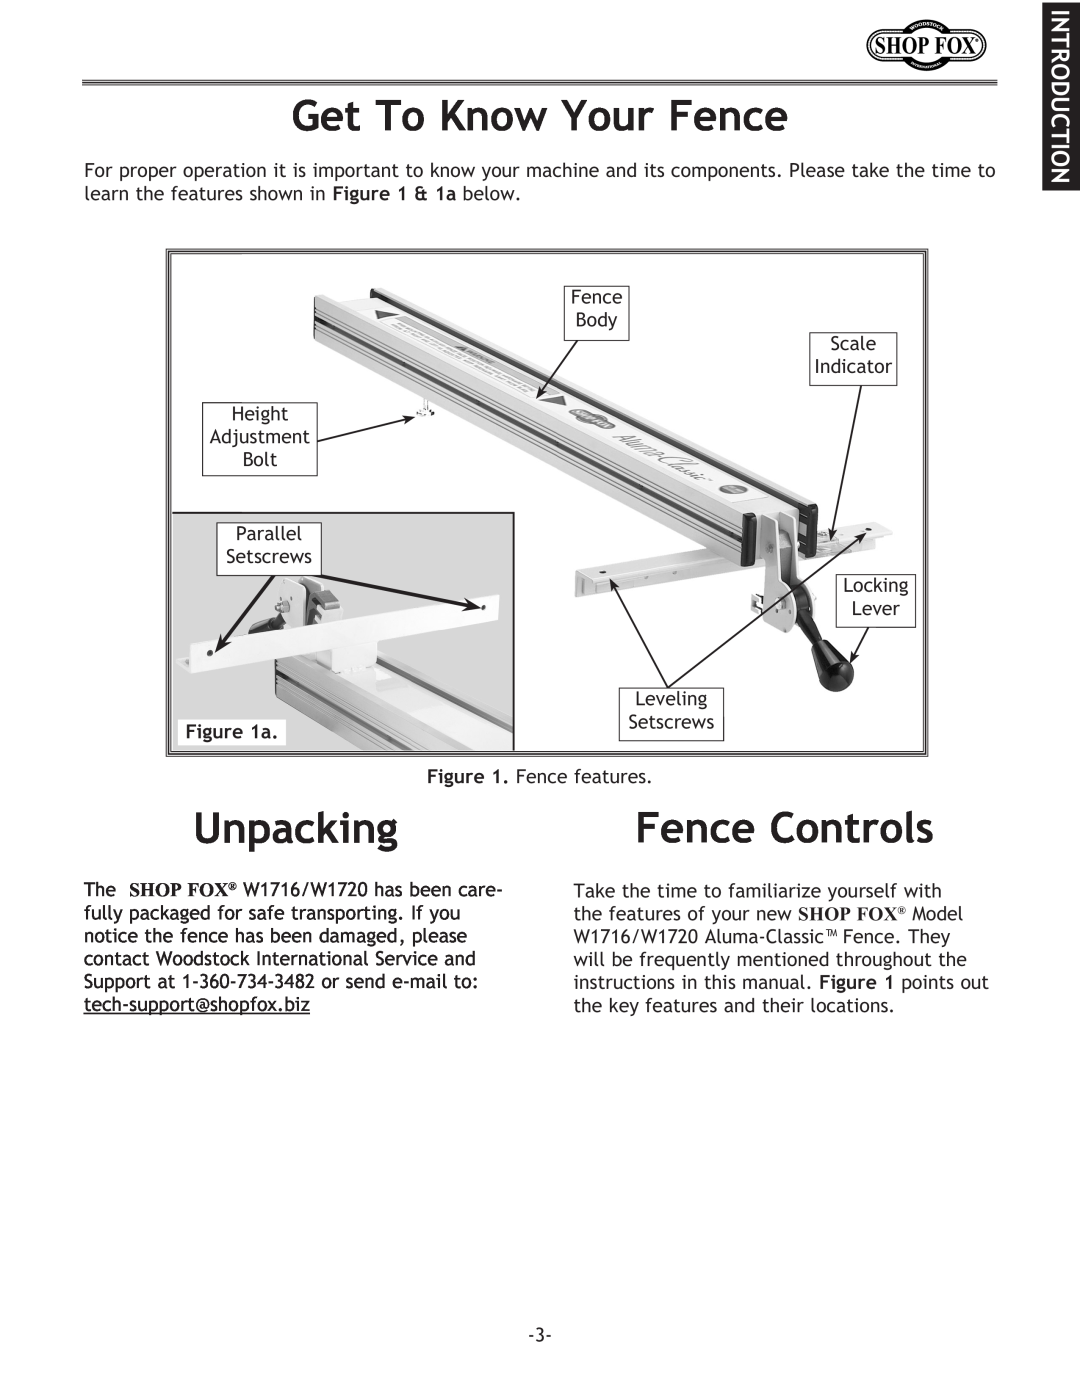 Woodstock W1720, W1716 instruction manual Get To Know Your Fence, Unpacking, Introduction, Fence Controls 